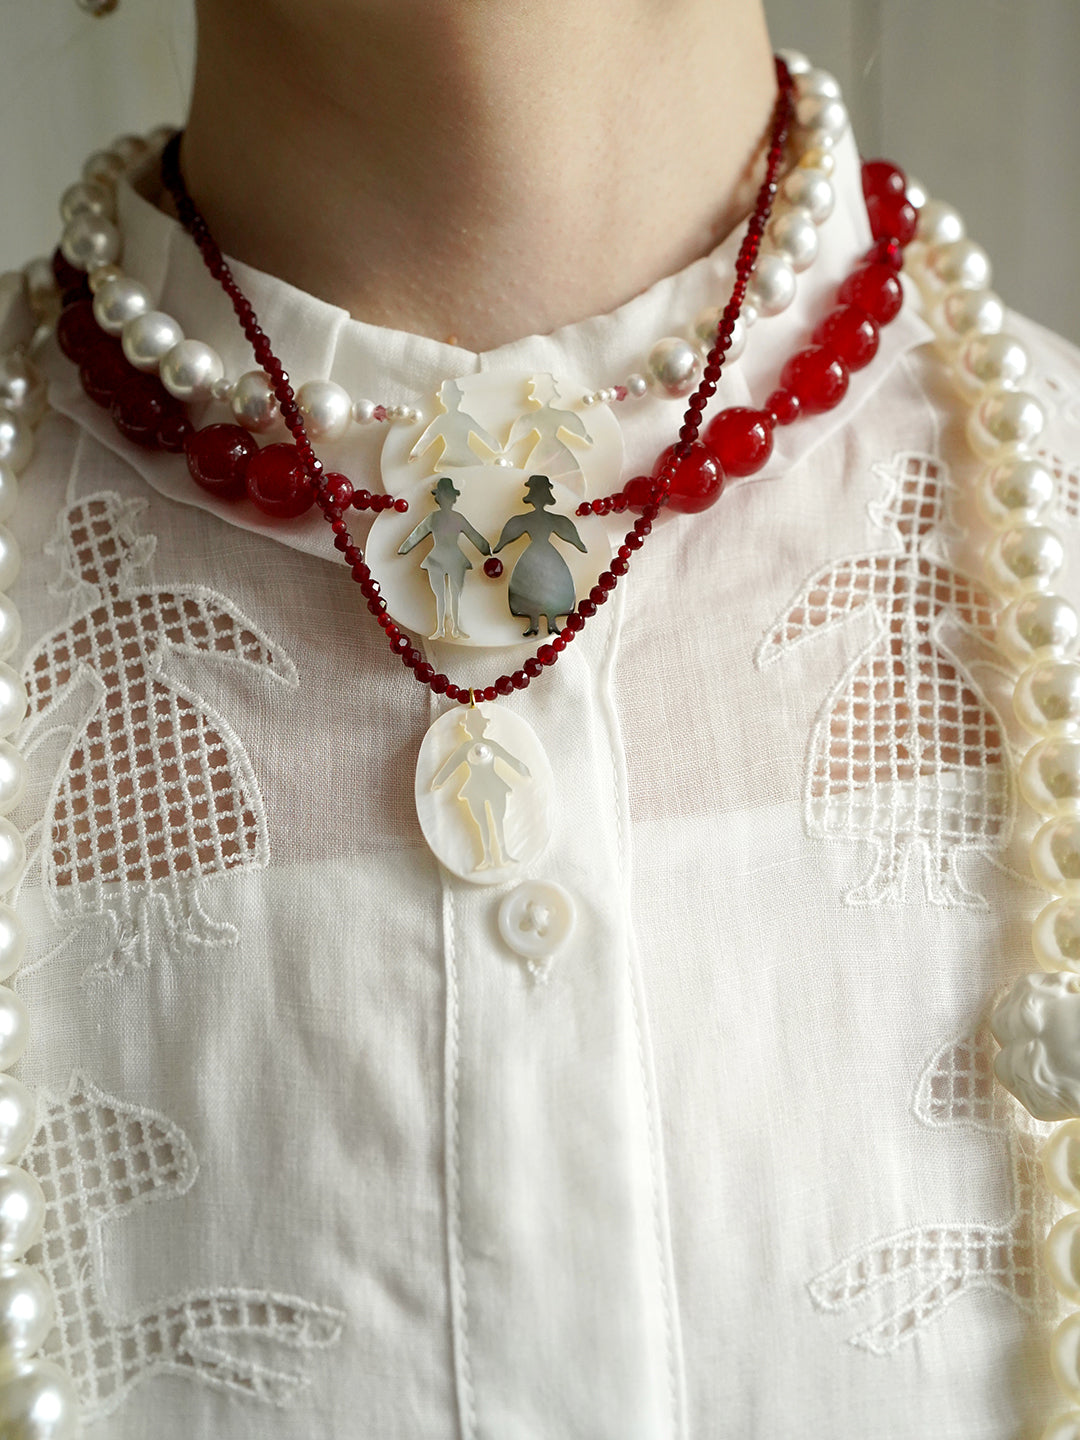 Handmade Red Agate Necklace with Brass Chain - Gift Idea